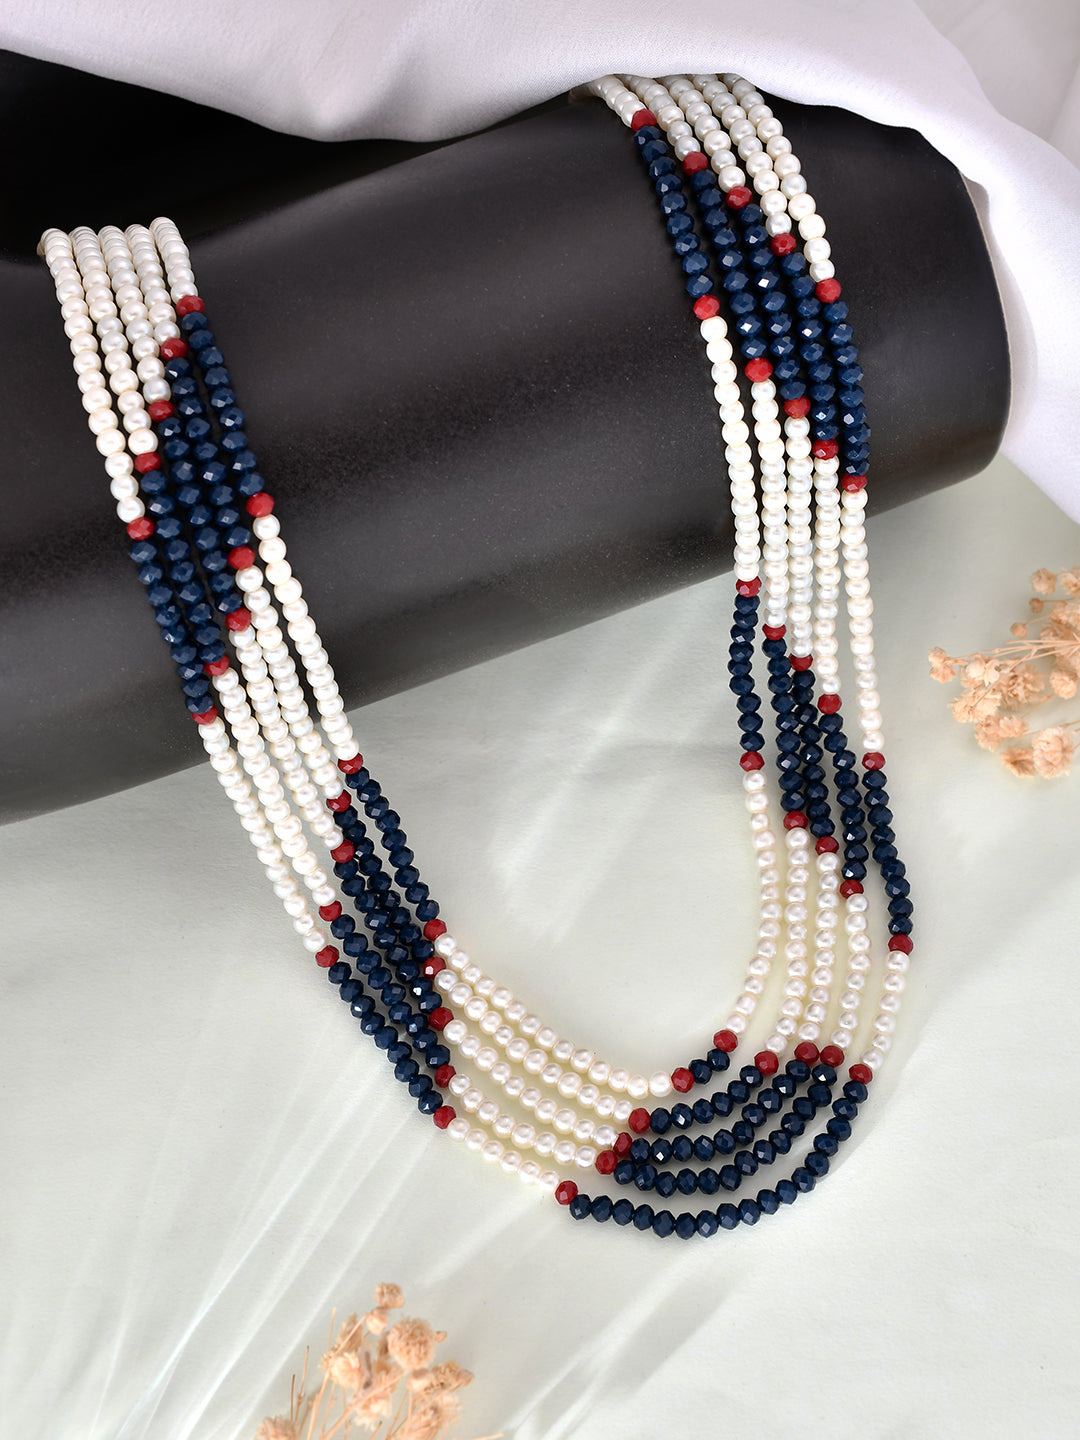 this beautiful long Layered pearl necklace is the perfect accessory for any woman or girl. The exquisite design and handcrafted details make it a timeless piece that will elevate any outfit. Add a touch of elegance and sophistication to your look with this stunning necklace.